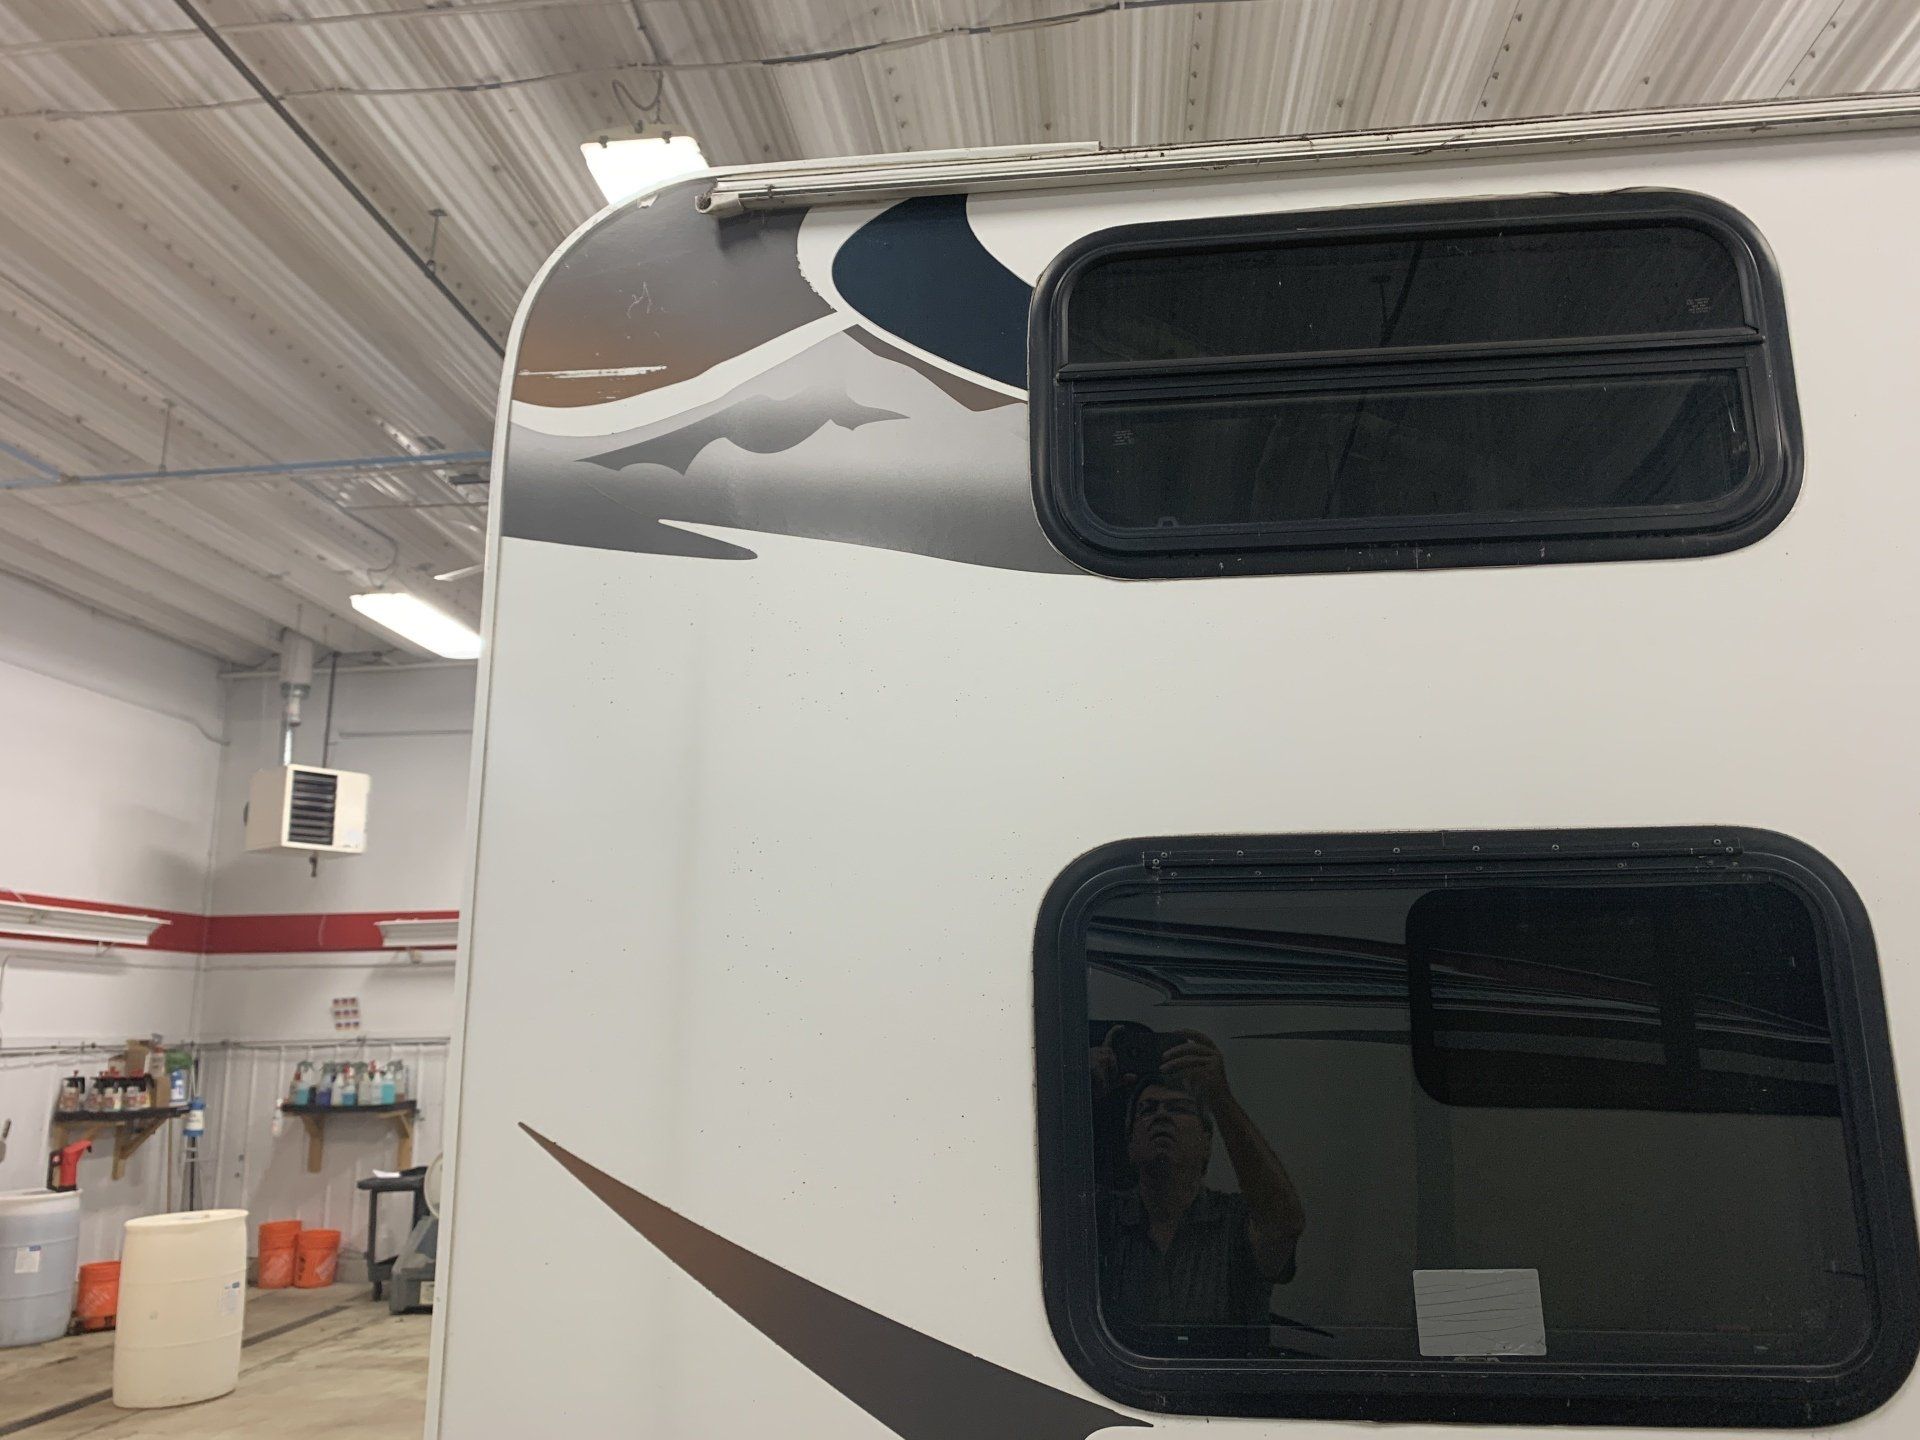 2020 - Alberta's Worst RV Decal Contest - Grand Prize Winner - Before & After - Pic 11